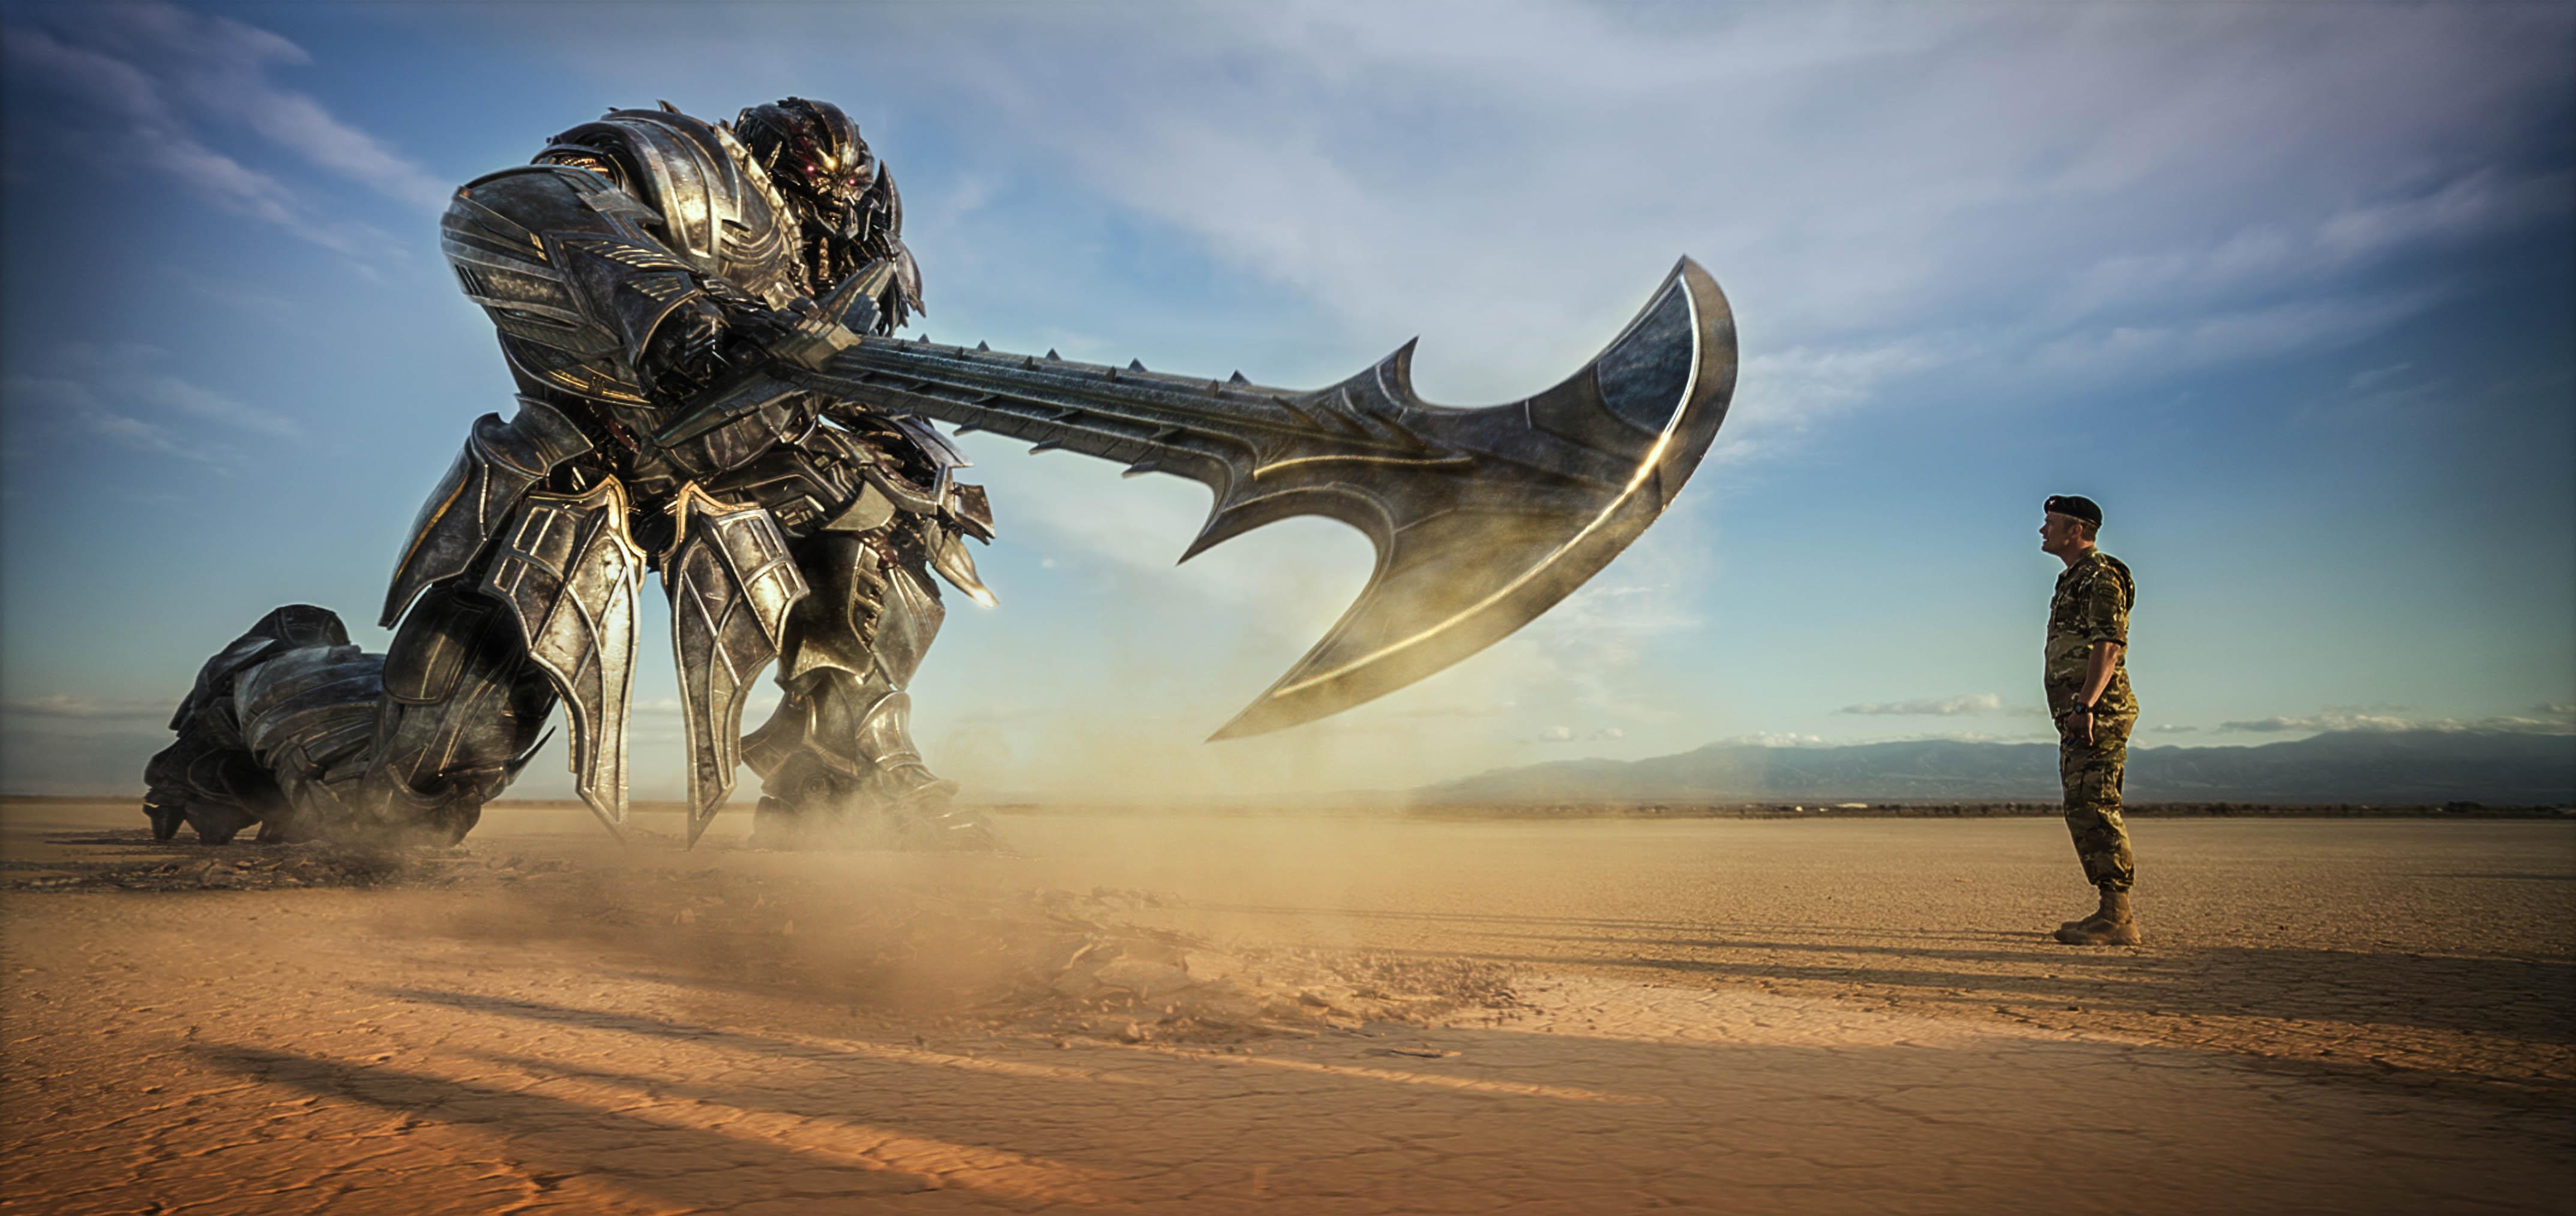 Transformers 5 Image Show Off More Robot Carnage